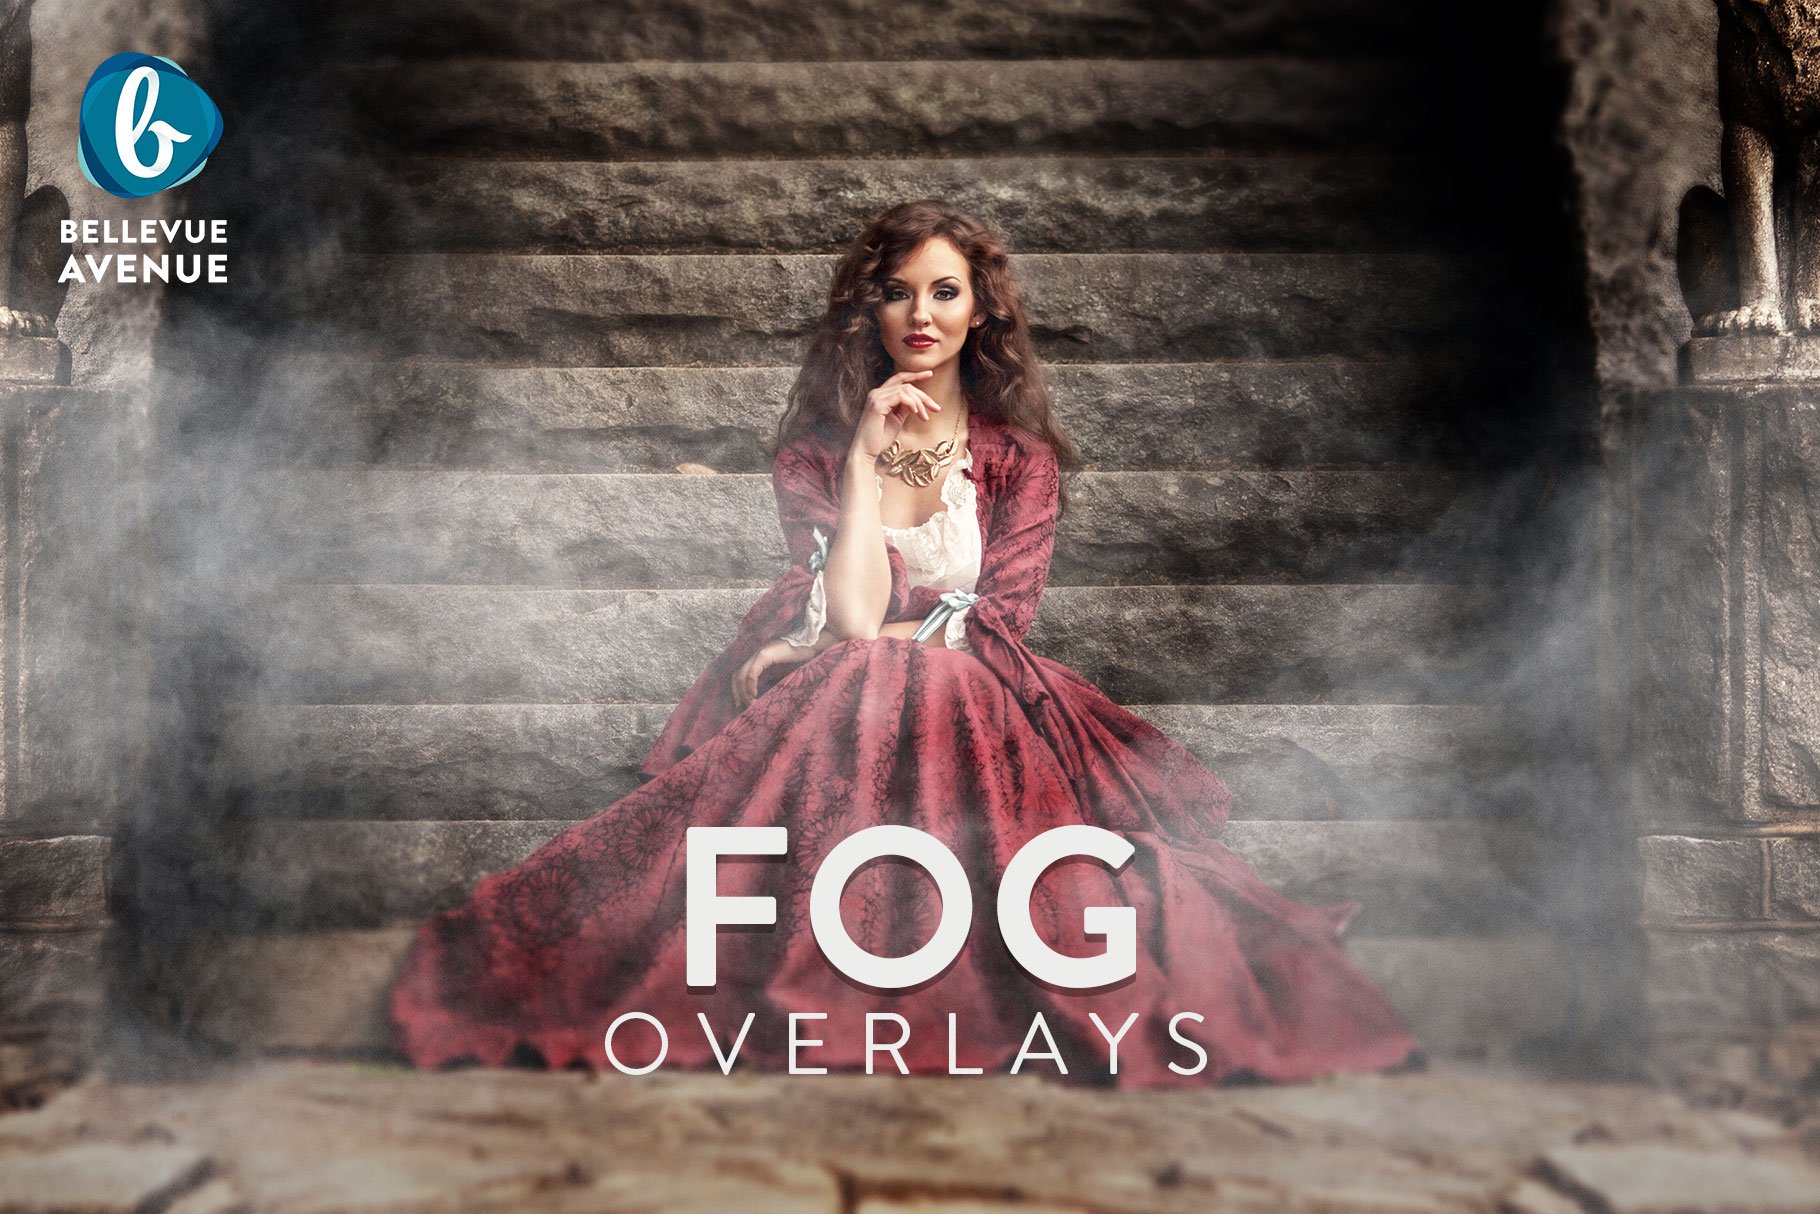 Fog Overlays (Real)cover image.